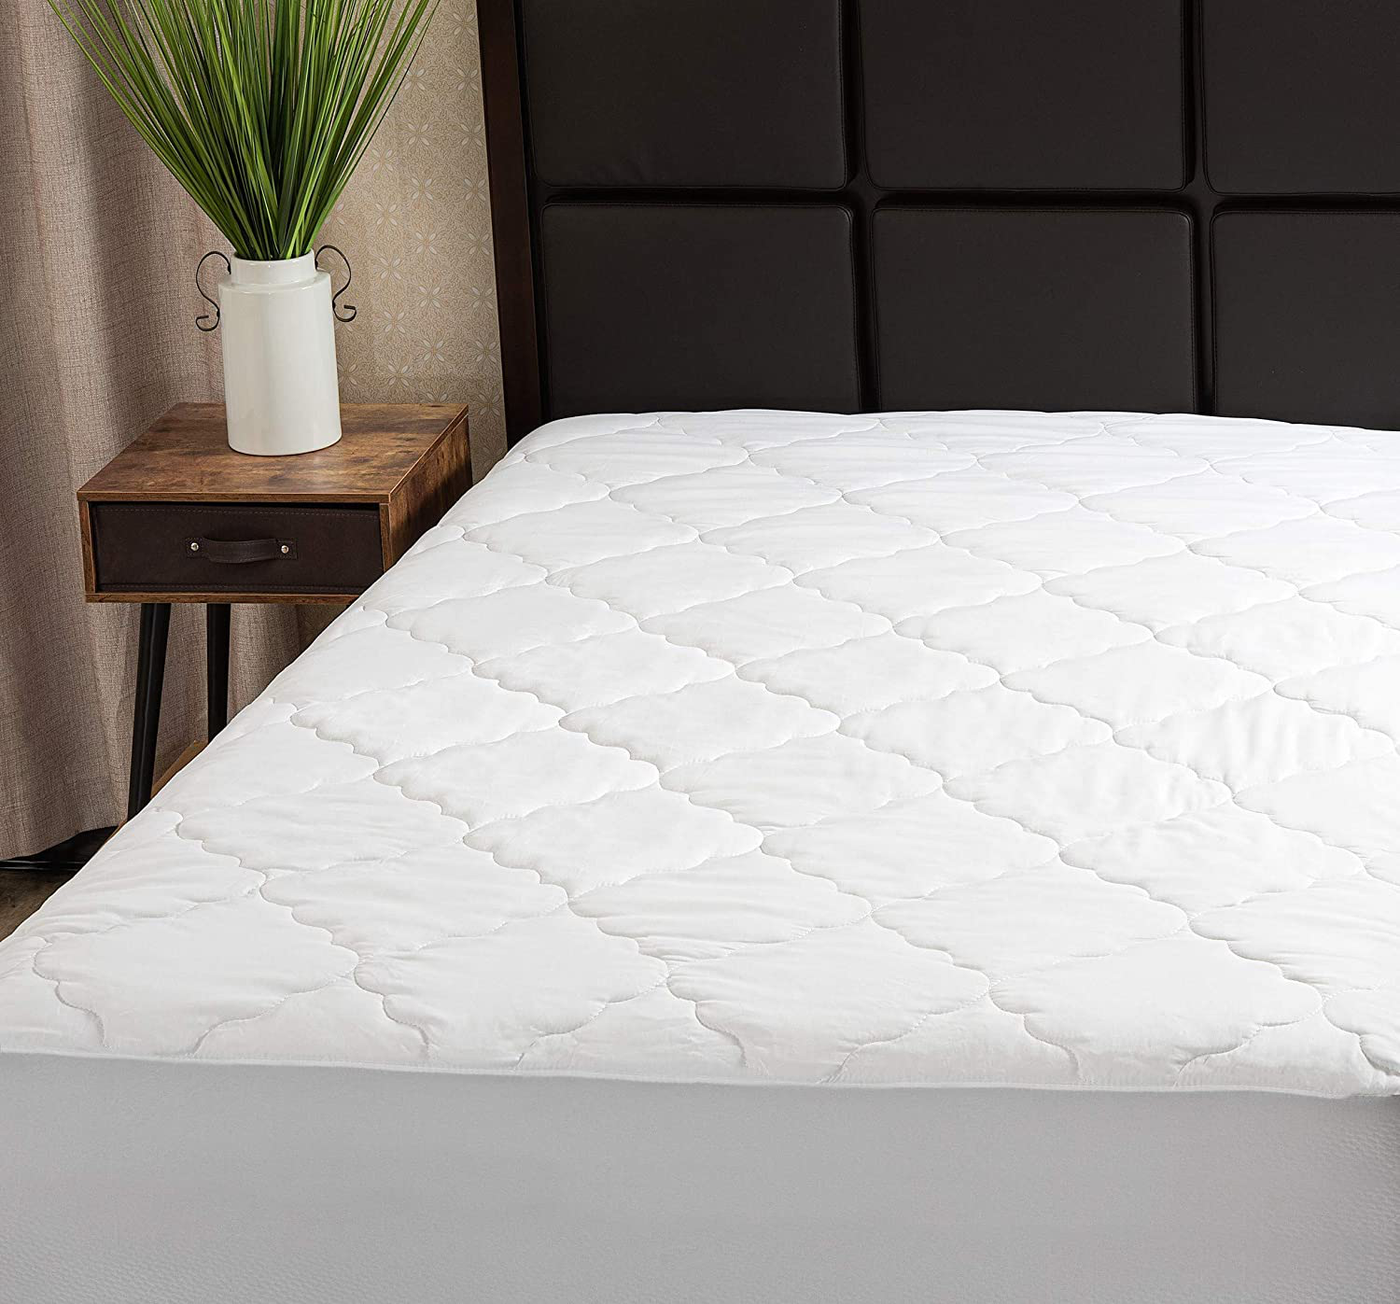 Micropuff King Mattress Pad Cover Fitted Quilted - Plush Down Alternative Fiber Fill Breathable Only Quality Fabrics Used Bed Protector - Deep Pocket Stretches up to 18 Inch (King Size 78x80)